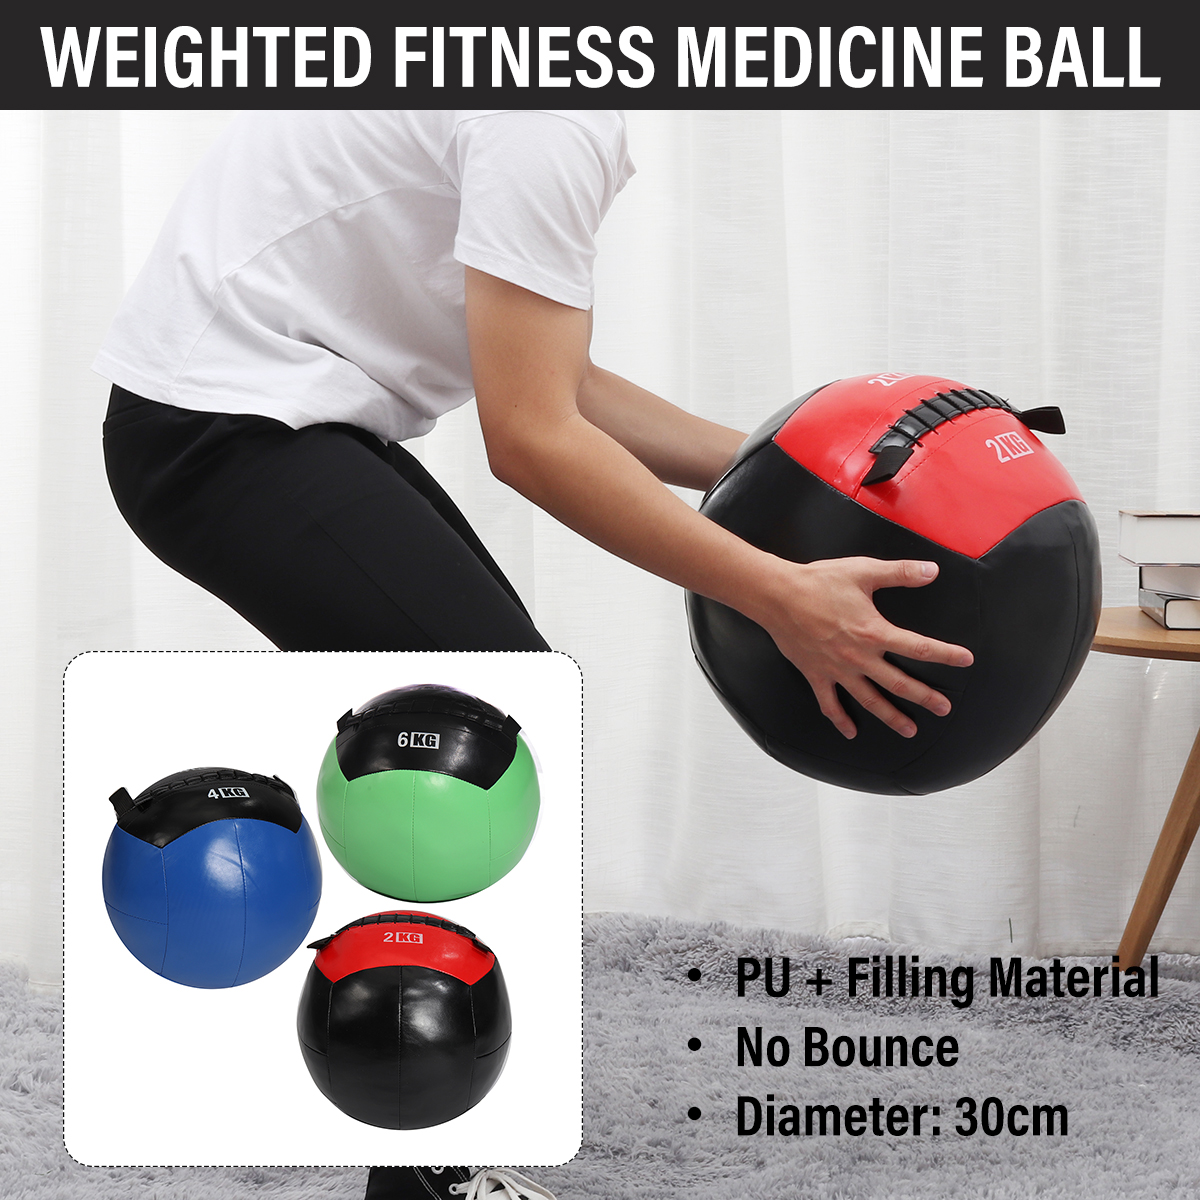 246KG-Weighted-Fitness-Balance-Ball-PU-Soft-Gym-Inelastic-Training-Exerciser-1748206-1